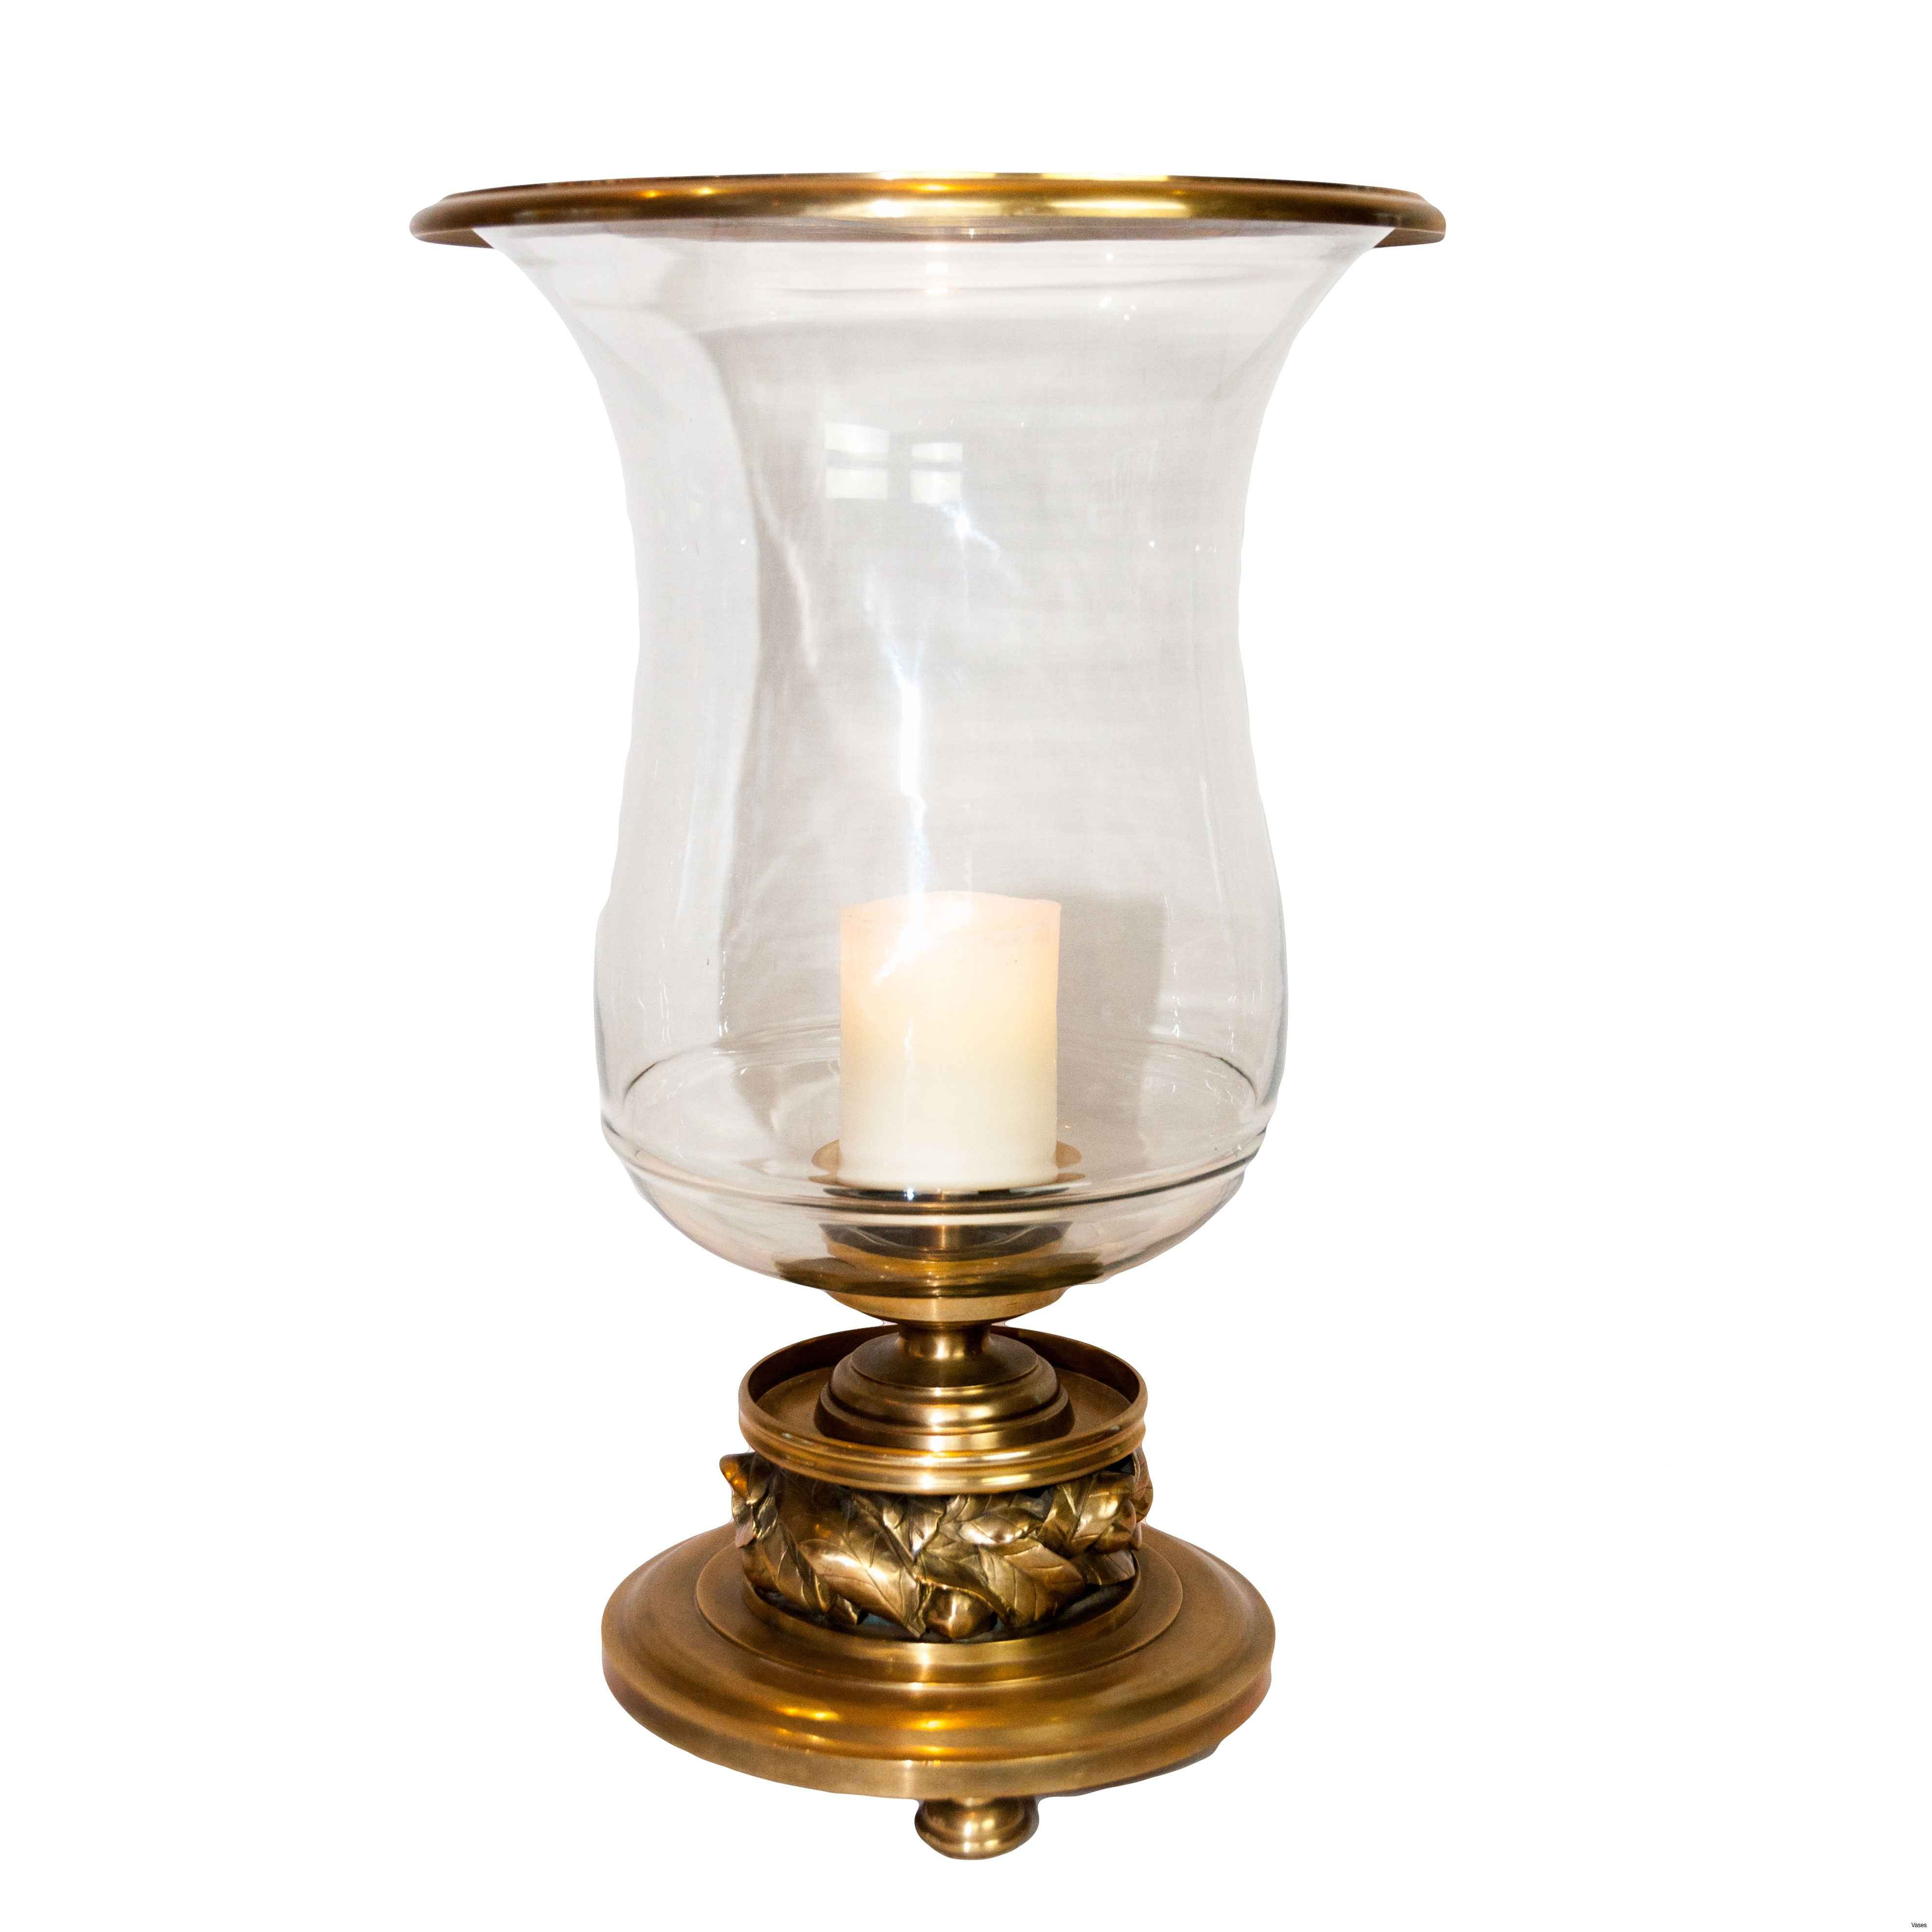 pedestal stands for vases of candle stands wholesale fresh candle holder wholesale glass votive in candle stands wholesale fresh candle holder wholesale glass votive candle holders beautiful